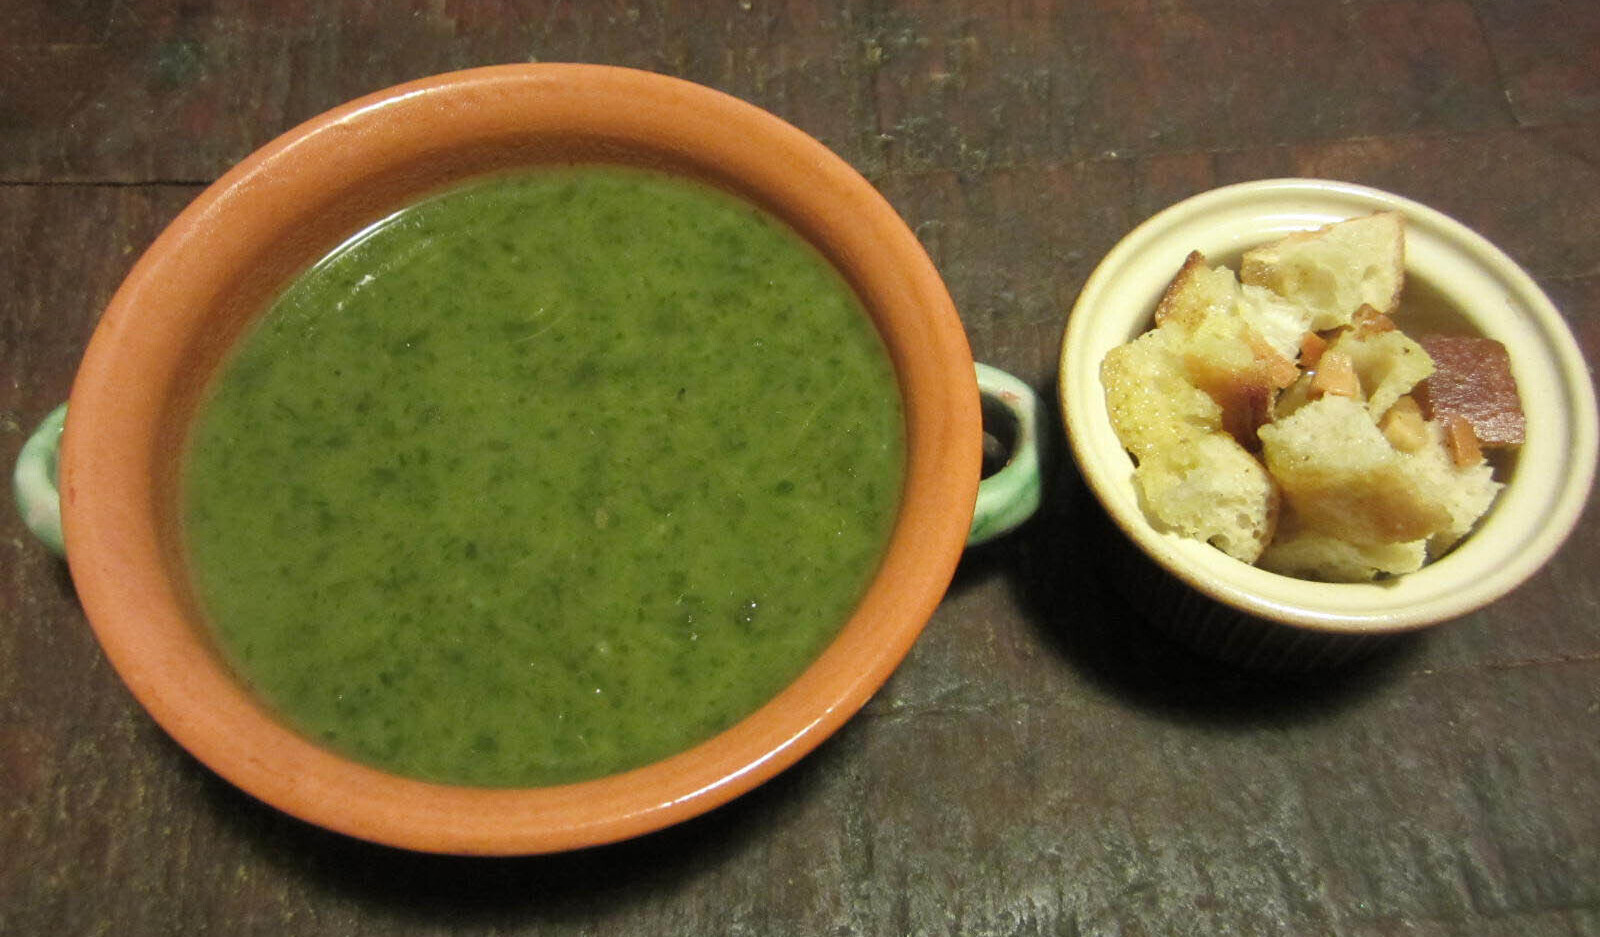 Leafy Greens Soup With Garlic Croutons